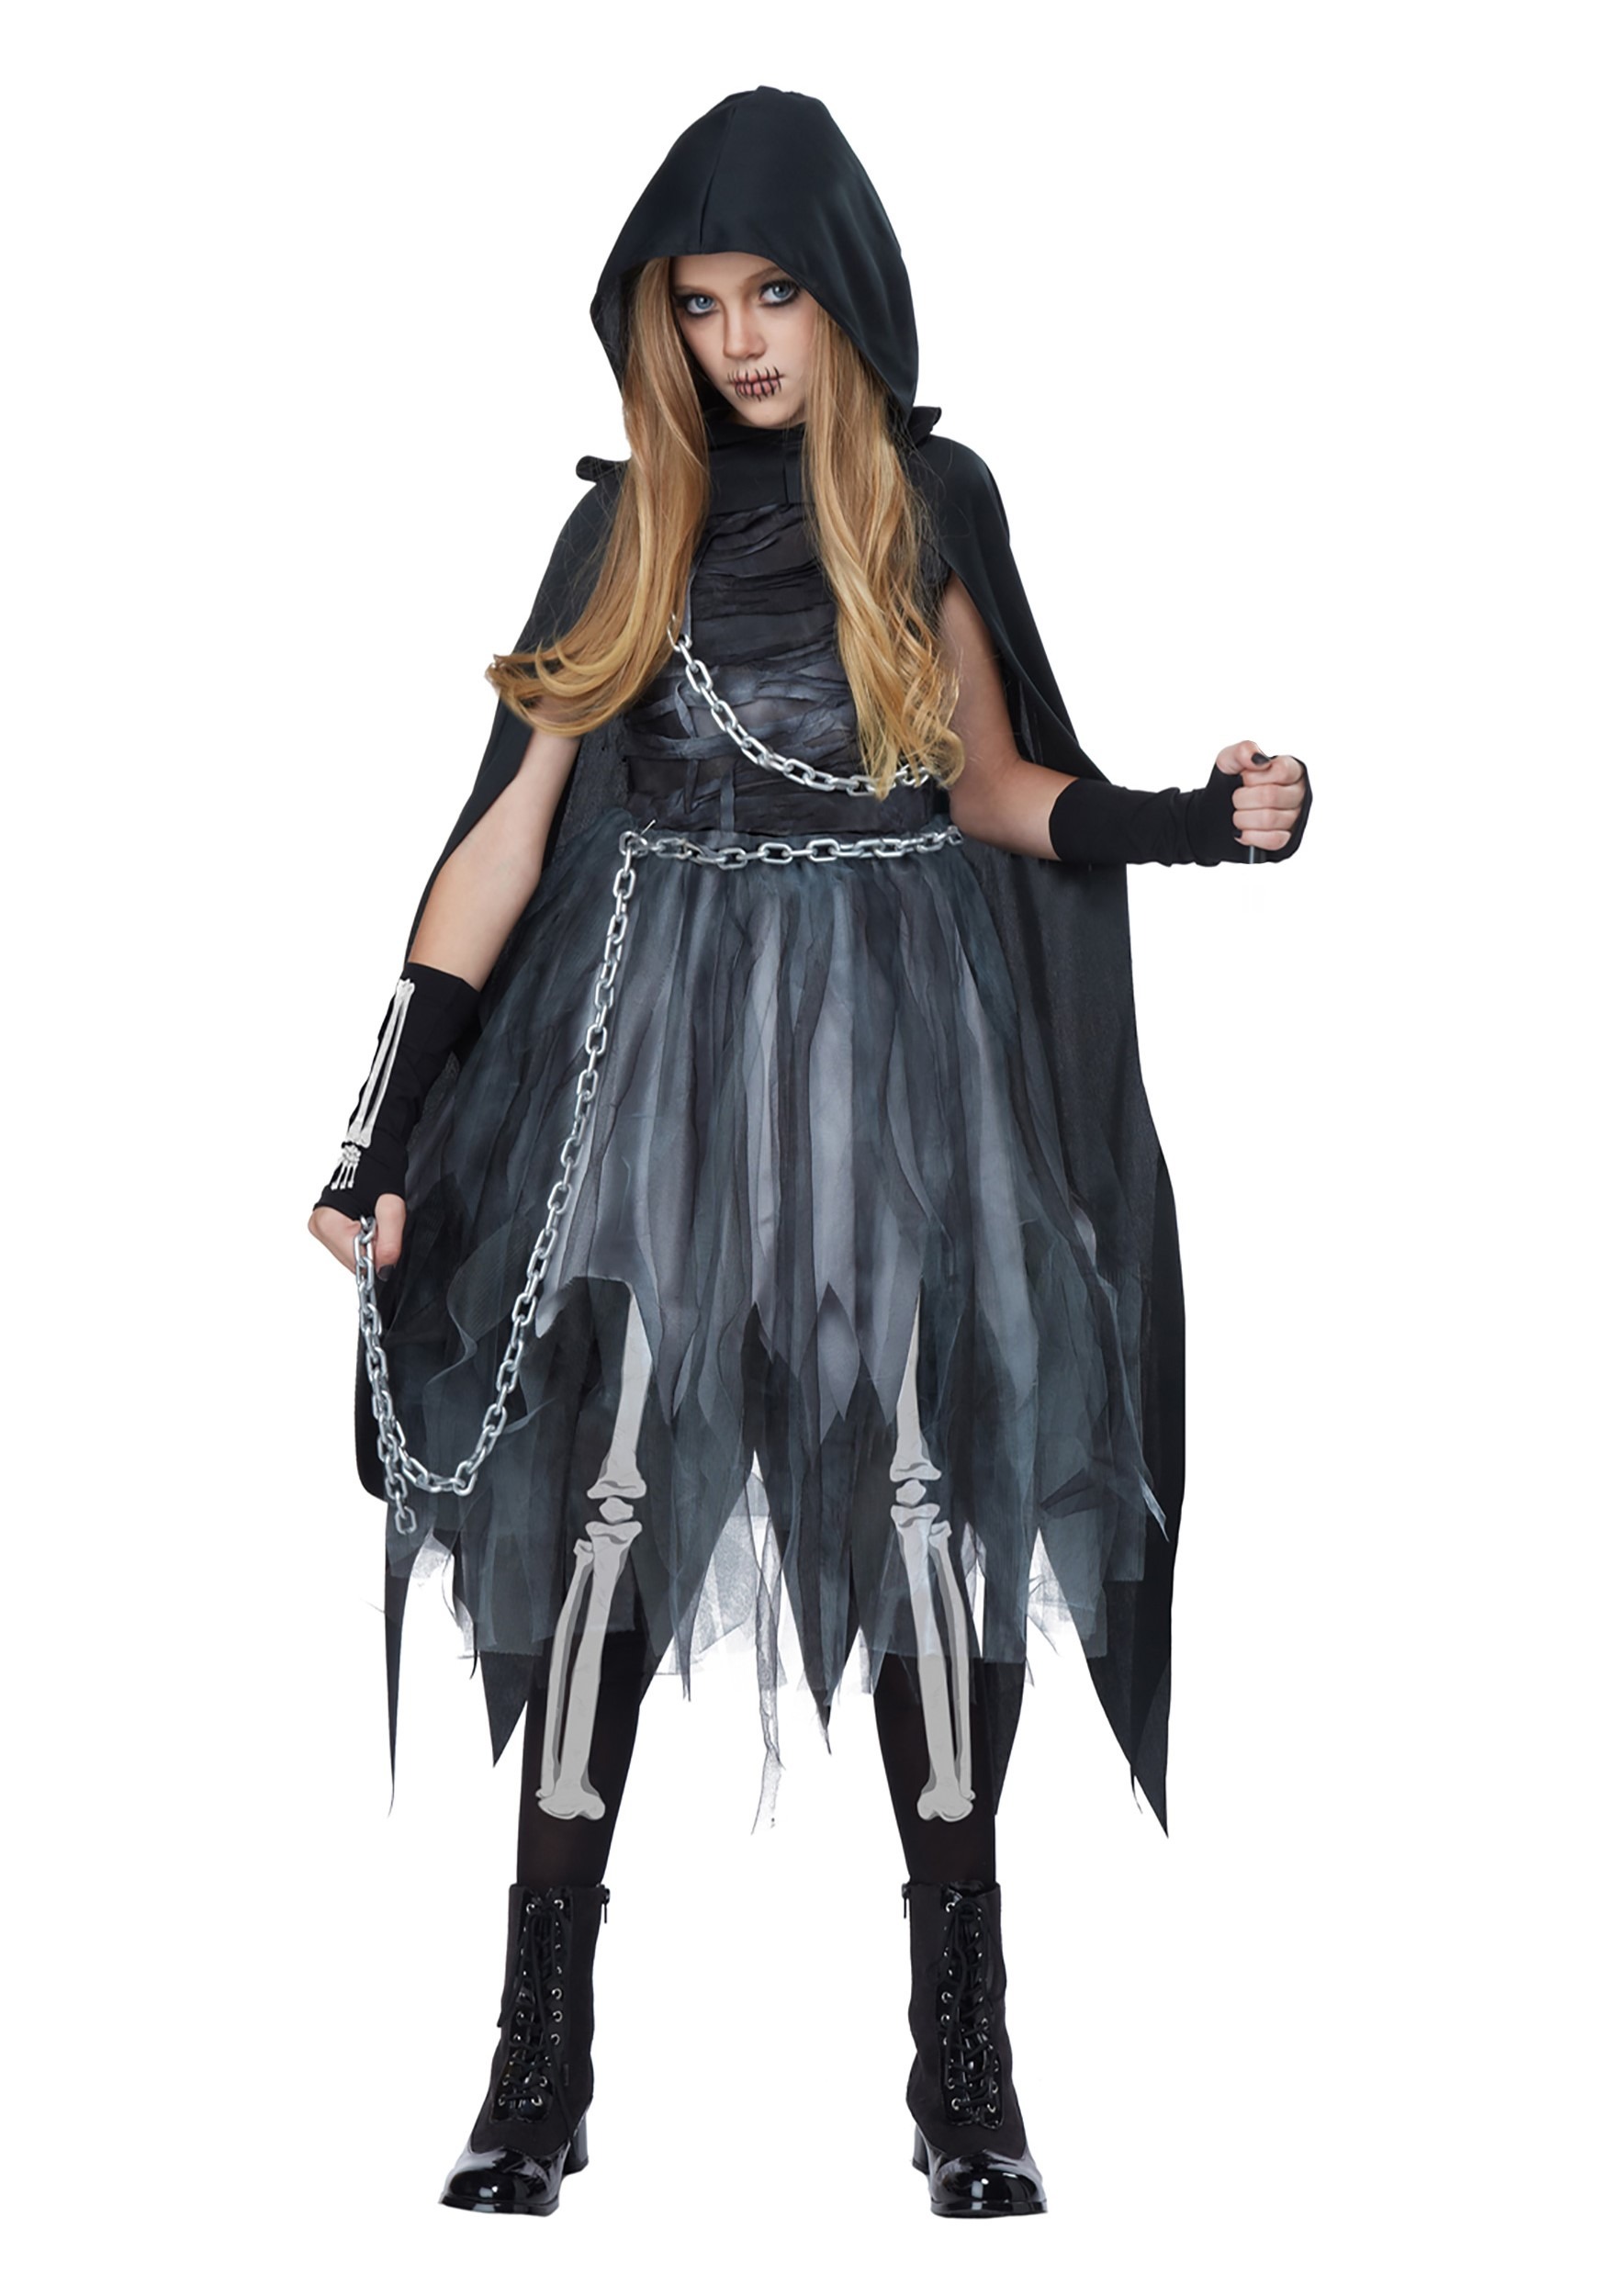 Photos - Fancy Dress California Costume Collection Scary Reaper Costume for Girls Black/Gra 